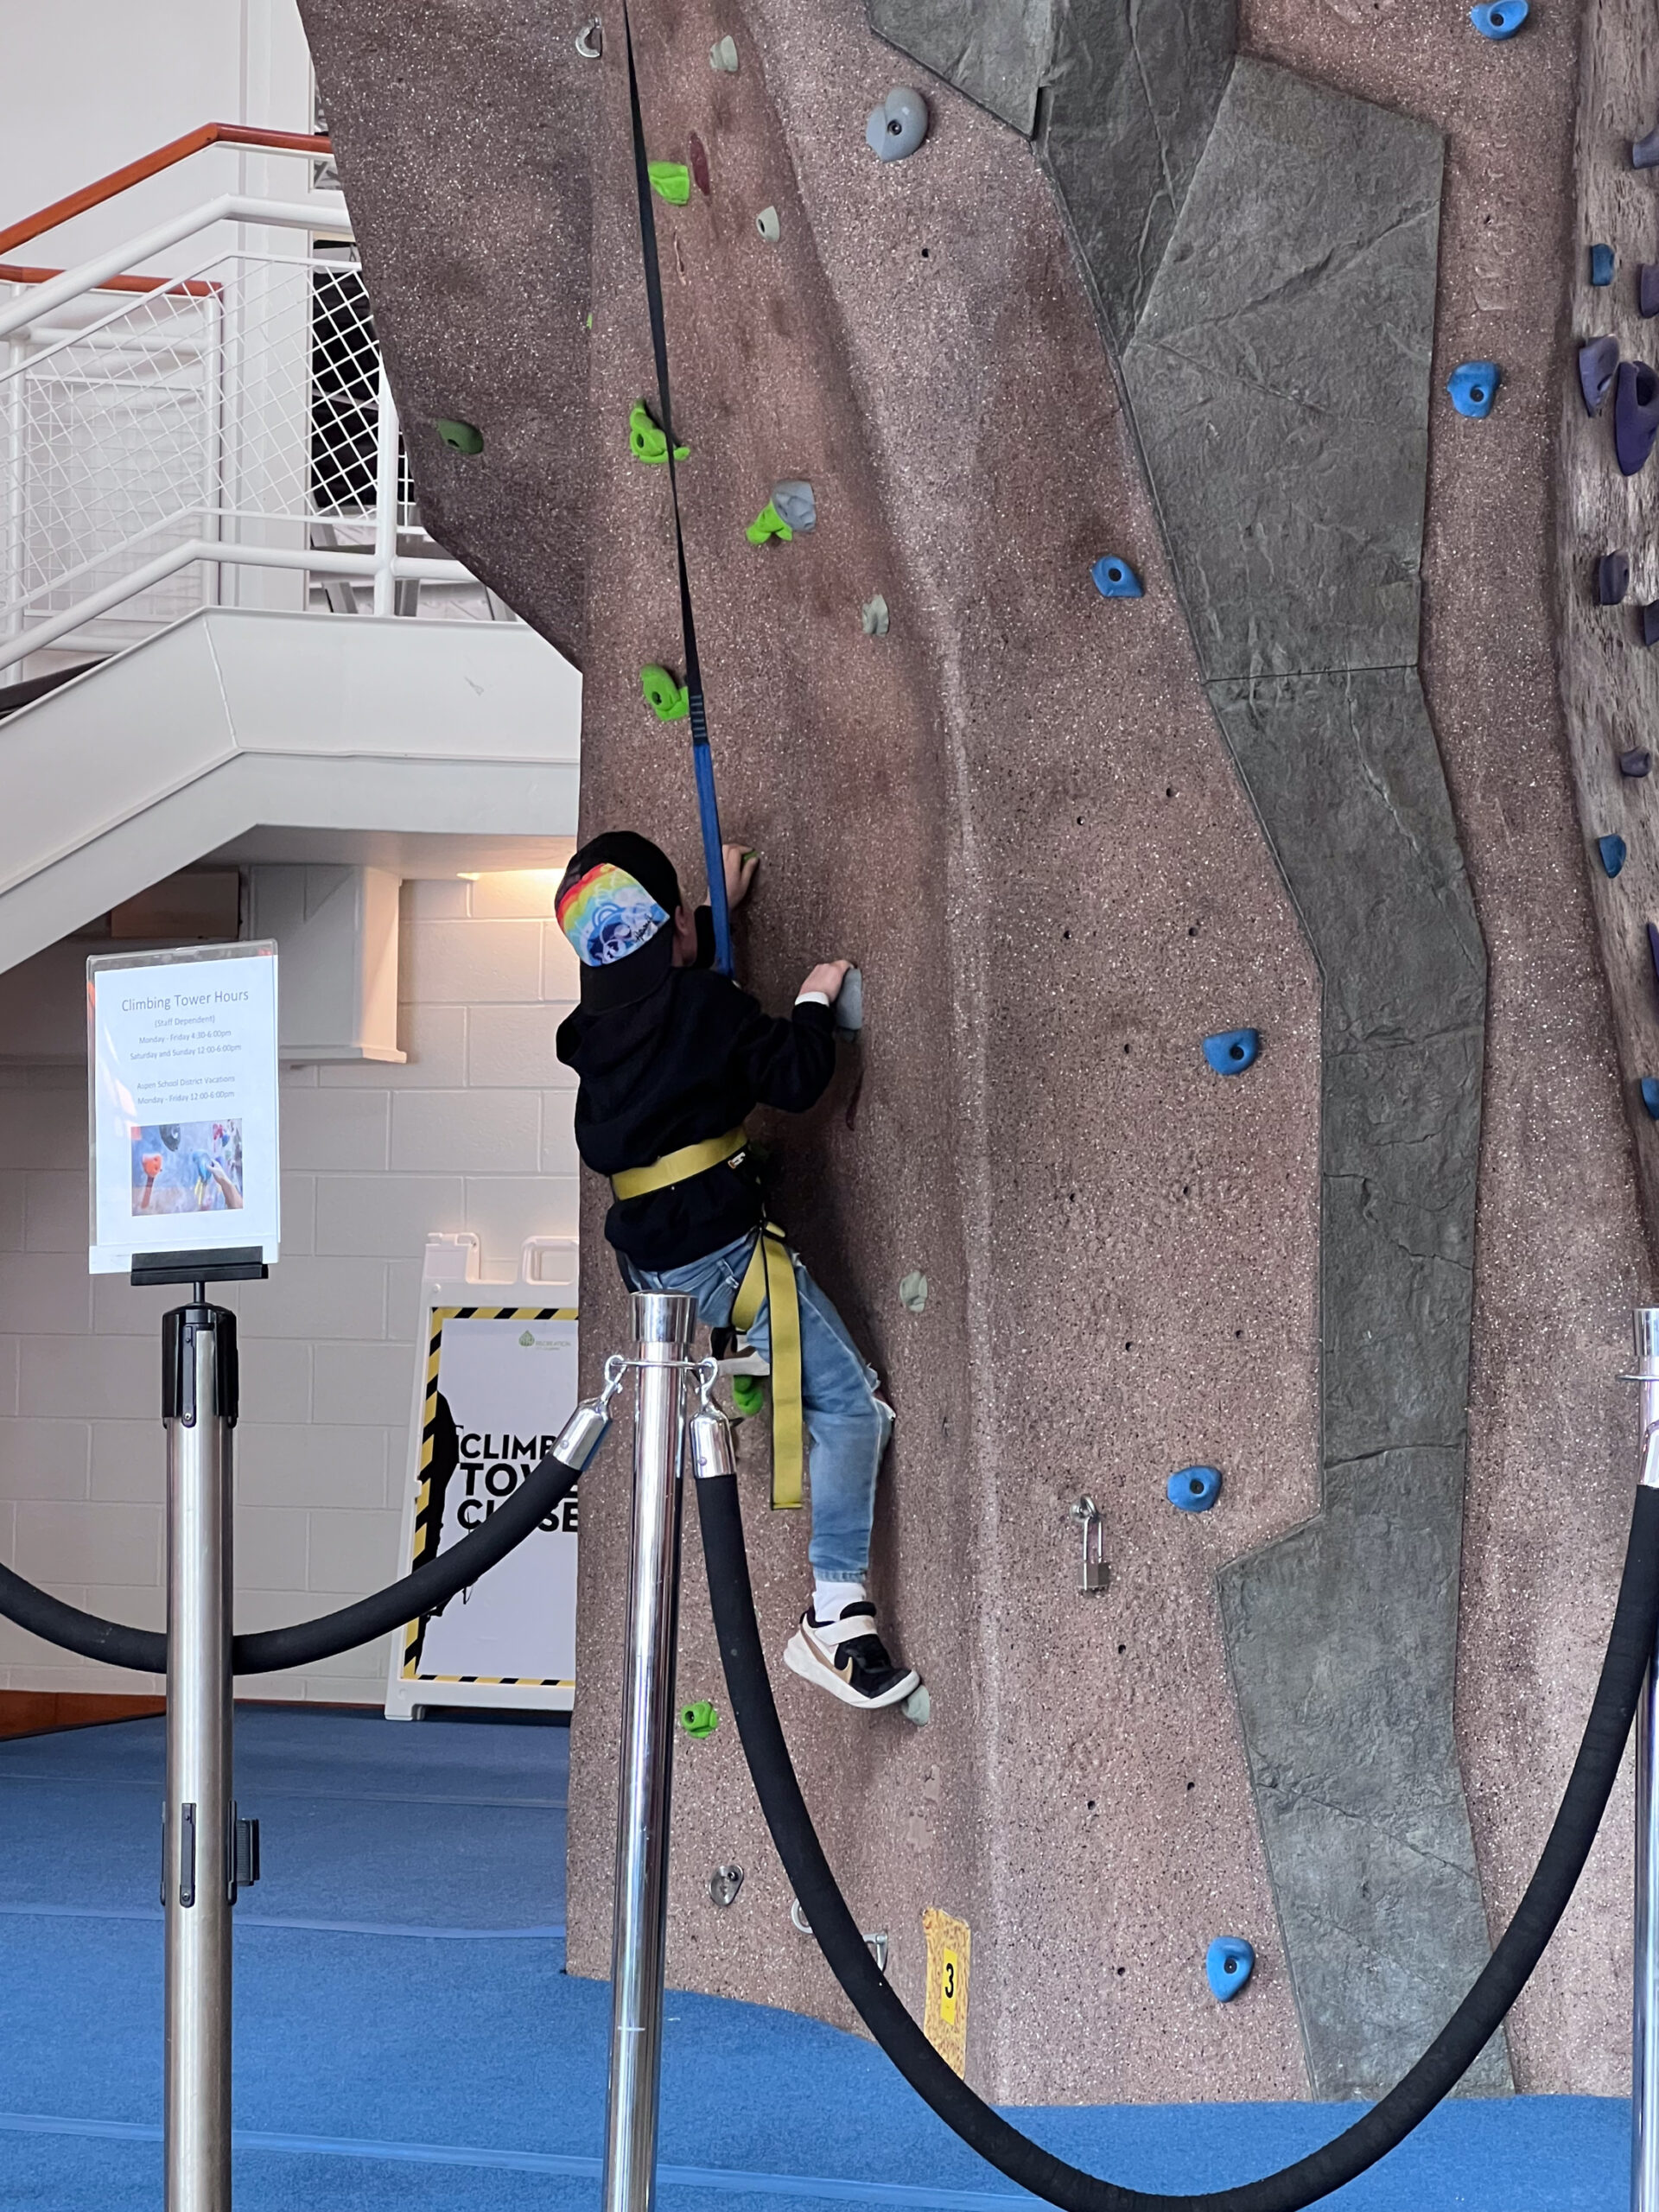 there is a rock climbing wall at the Aspen Recreation center (ARC) that's included too! #visitaspen #travelwithkids #theldltravles